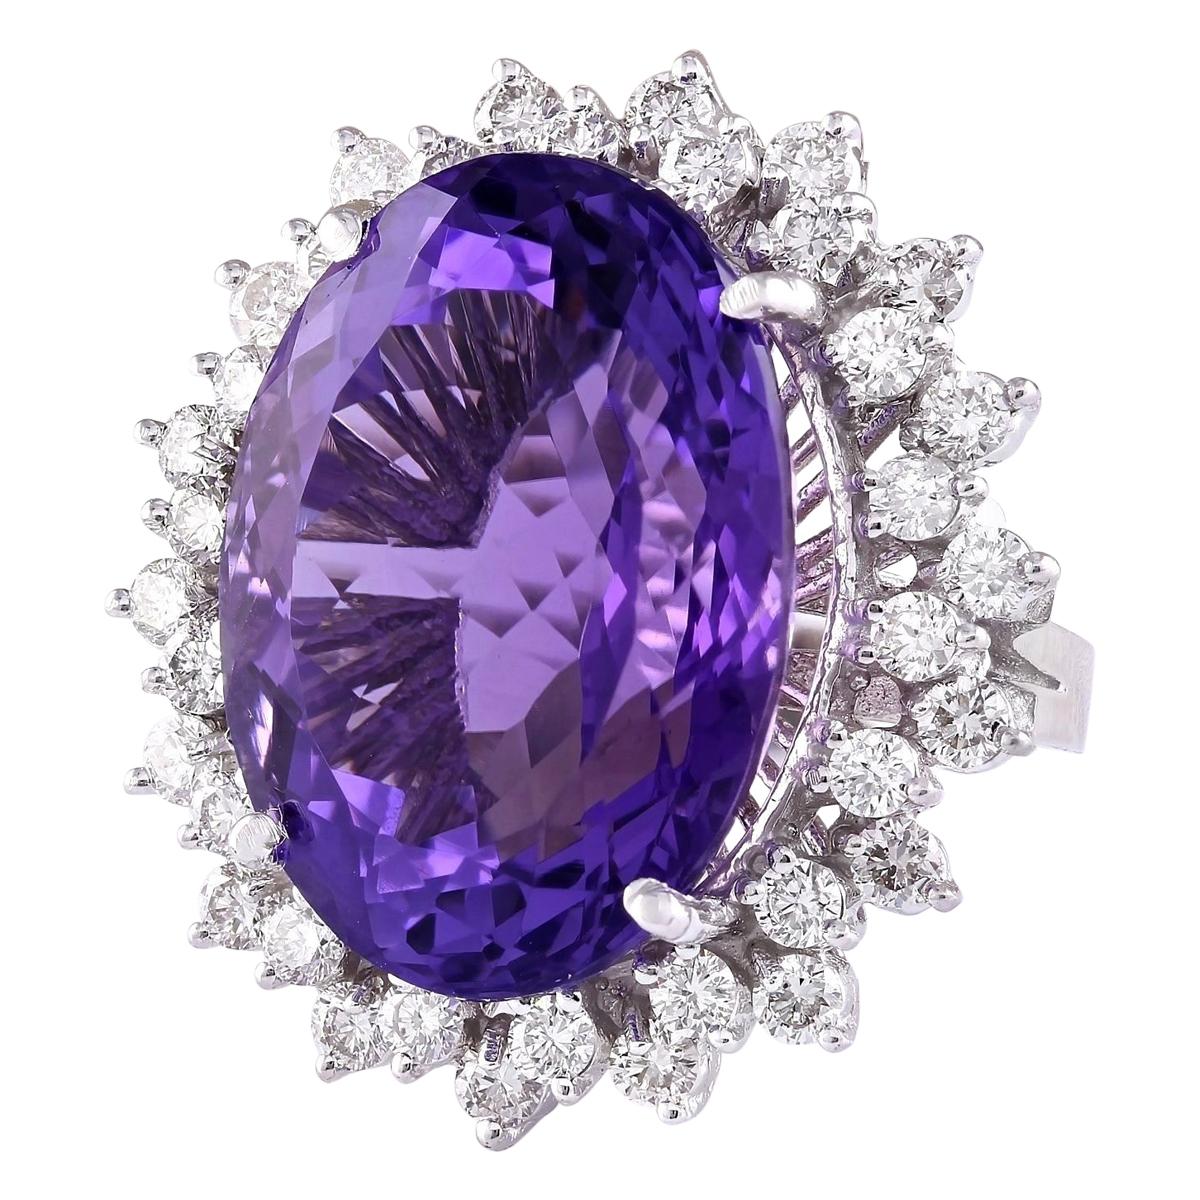 Stamped: 14K White Gold
Total Ring Weight: 15.2 Grams
Amethyst Weight is 25.50 Carat (Measures: 22.00x16.00 mm)
Diamond Weight is 2.00 Carat
Color: F-G, Clarity: VS2-SI1
Face Measures: 29.35x26.70 mm
Sku: [703692W]